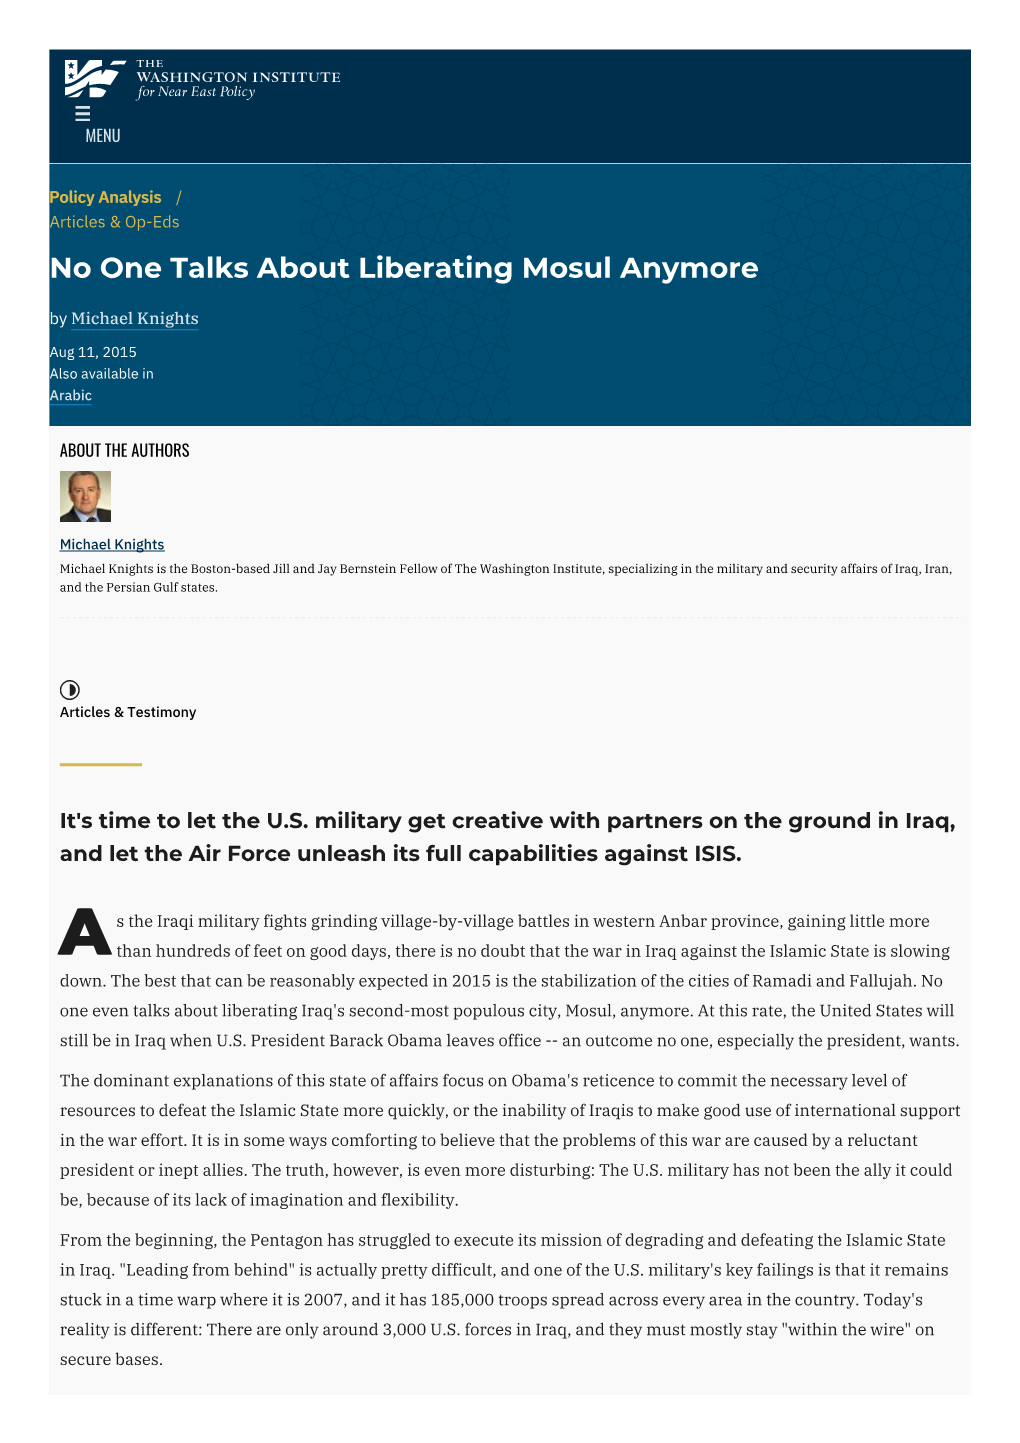 No One Talks About Liberating Mosul Anymore | the Washington Institute